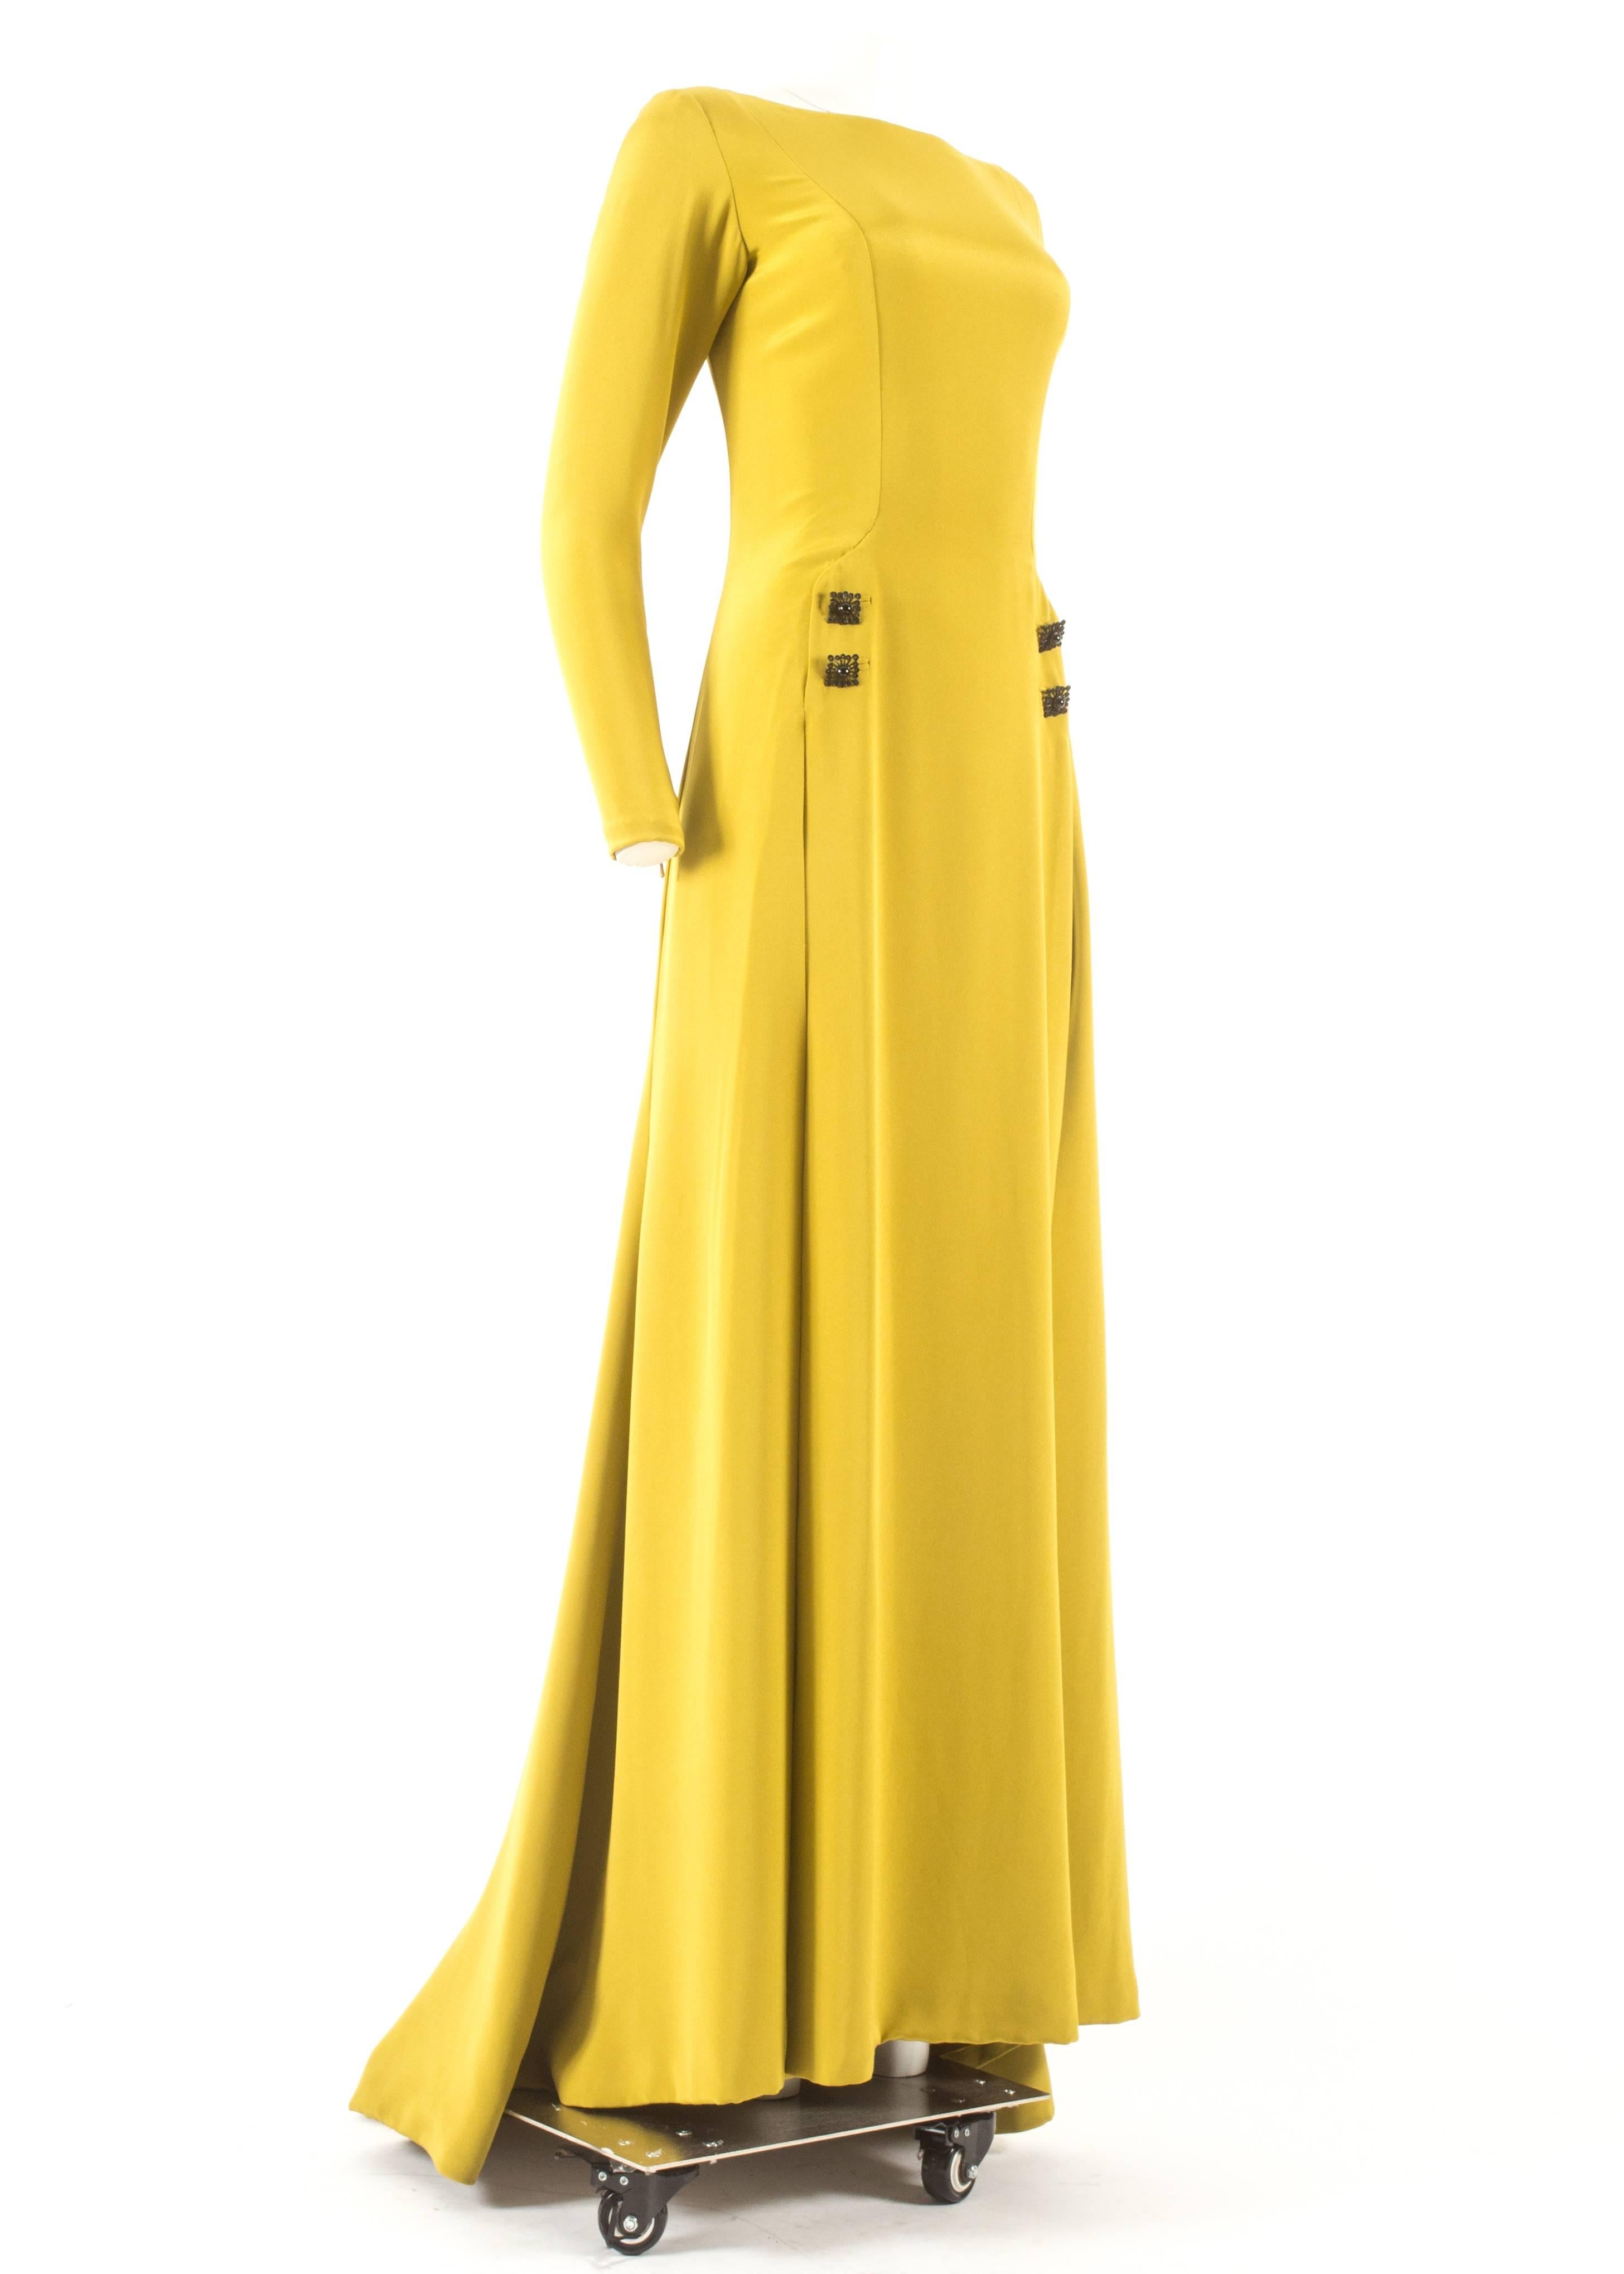 Women's Gerald Watelet Autumn-Winter 2003 Couture evening dress with thigh high slits For Sale